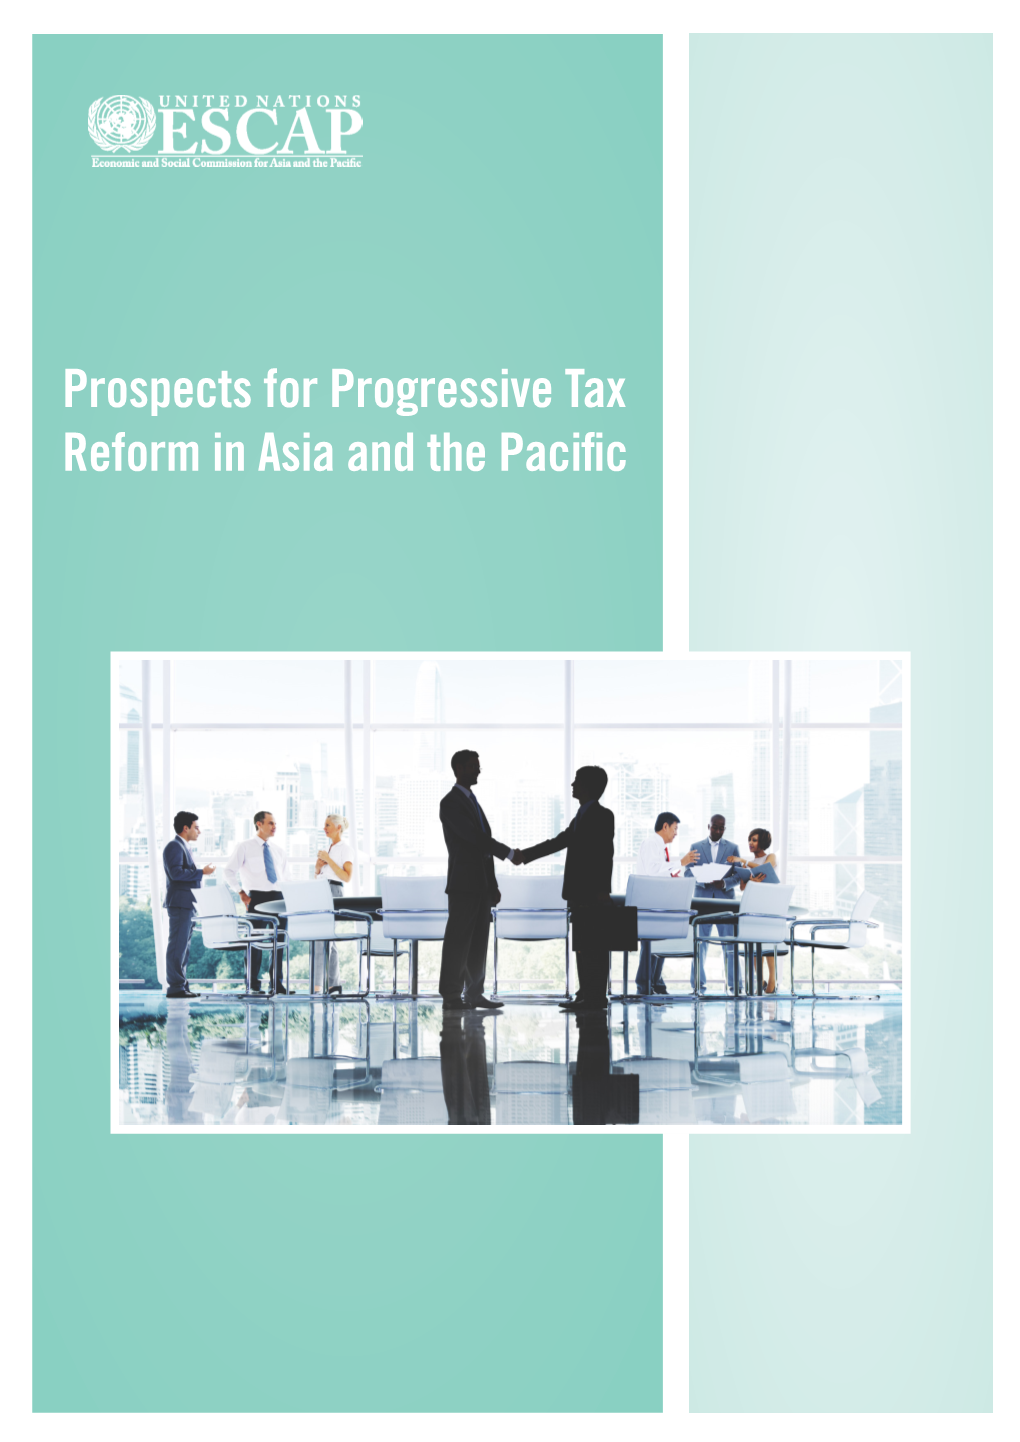 Prospects for Progressive Tax Reform in Asia and the Pacific